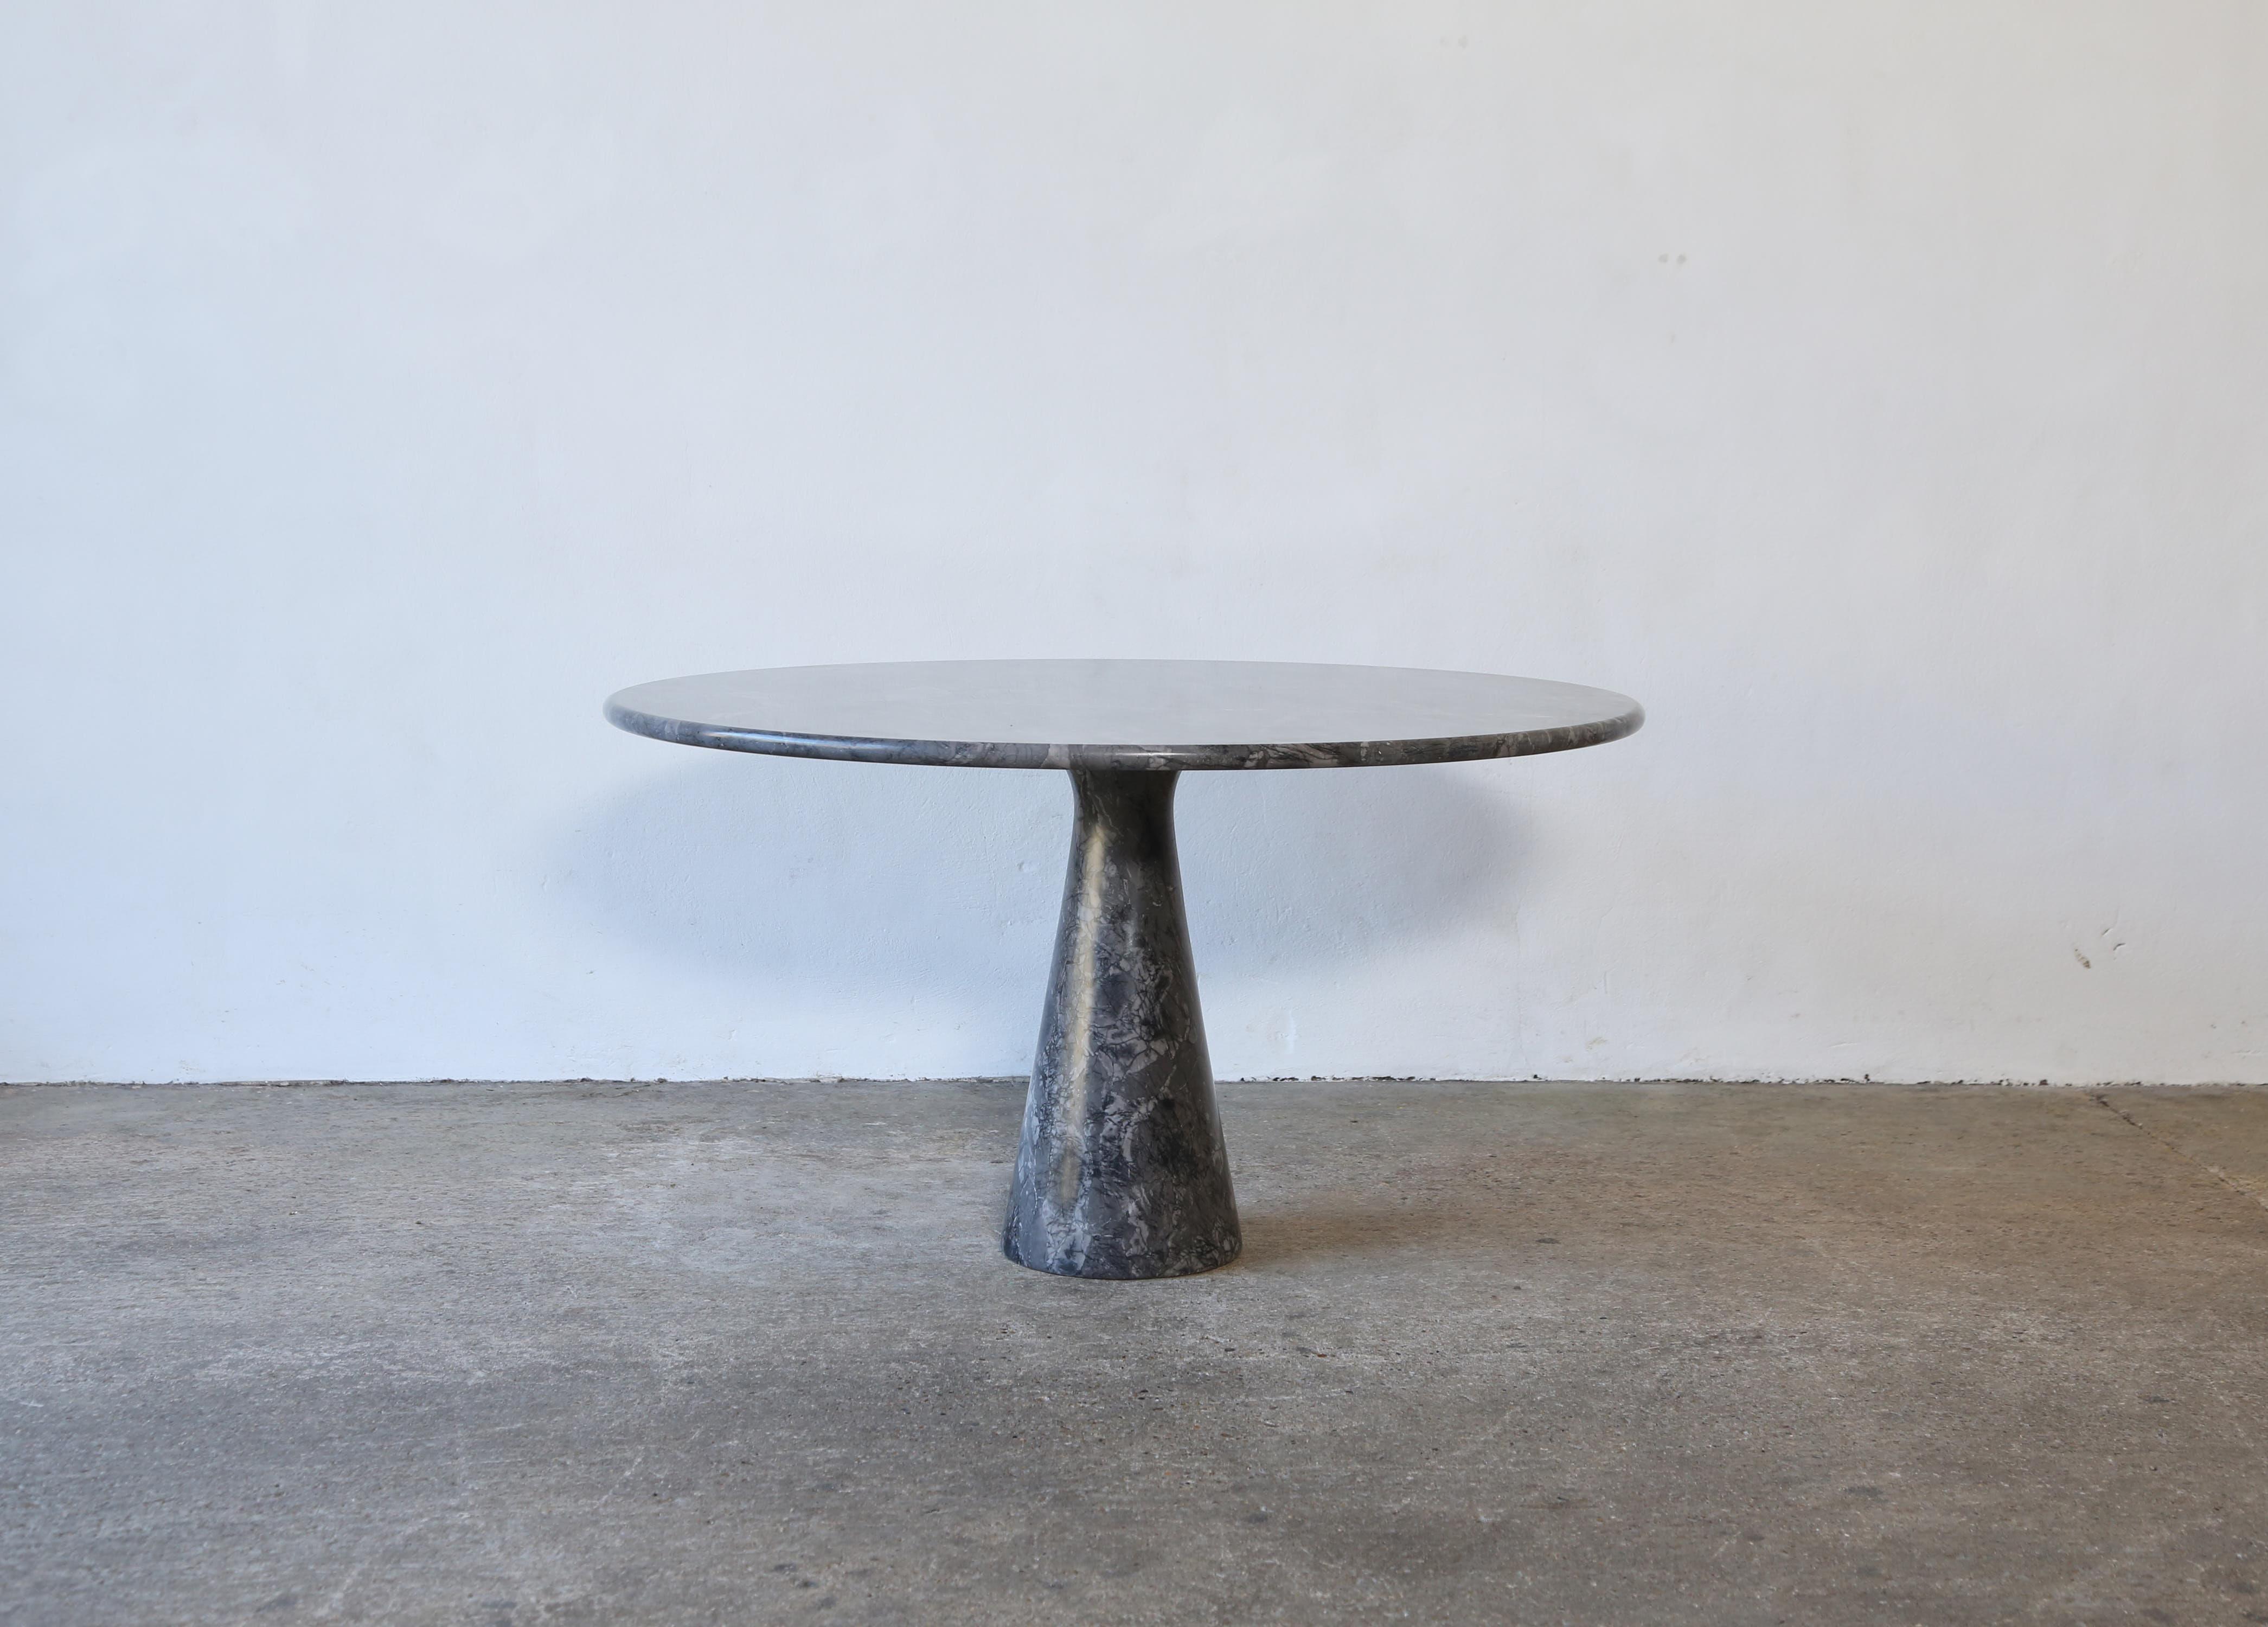 A beautiful, original Angelo Mangiarotti round marble M1 dining table for Skipper, Italy, 1970s. Stunning solid marble with super shades of grey,   Very good condition. Ships worldwide.

Lit: Giuliana Gramigna, Repertorio del design Italiano